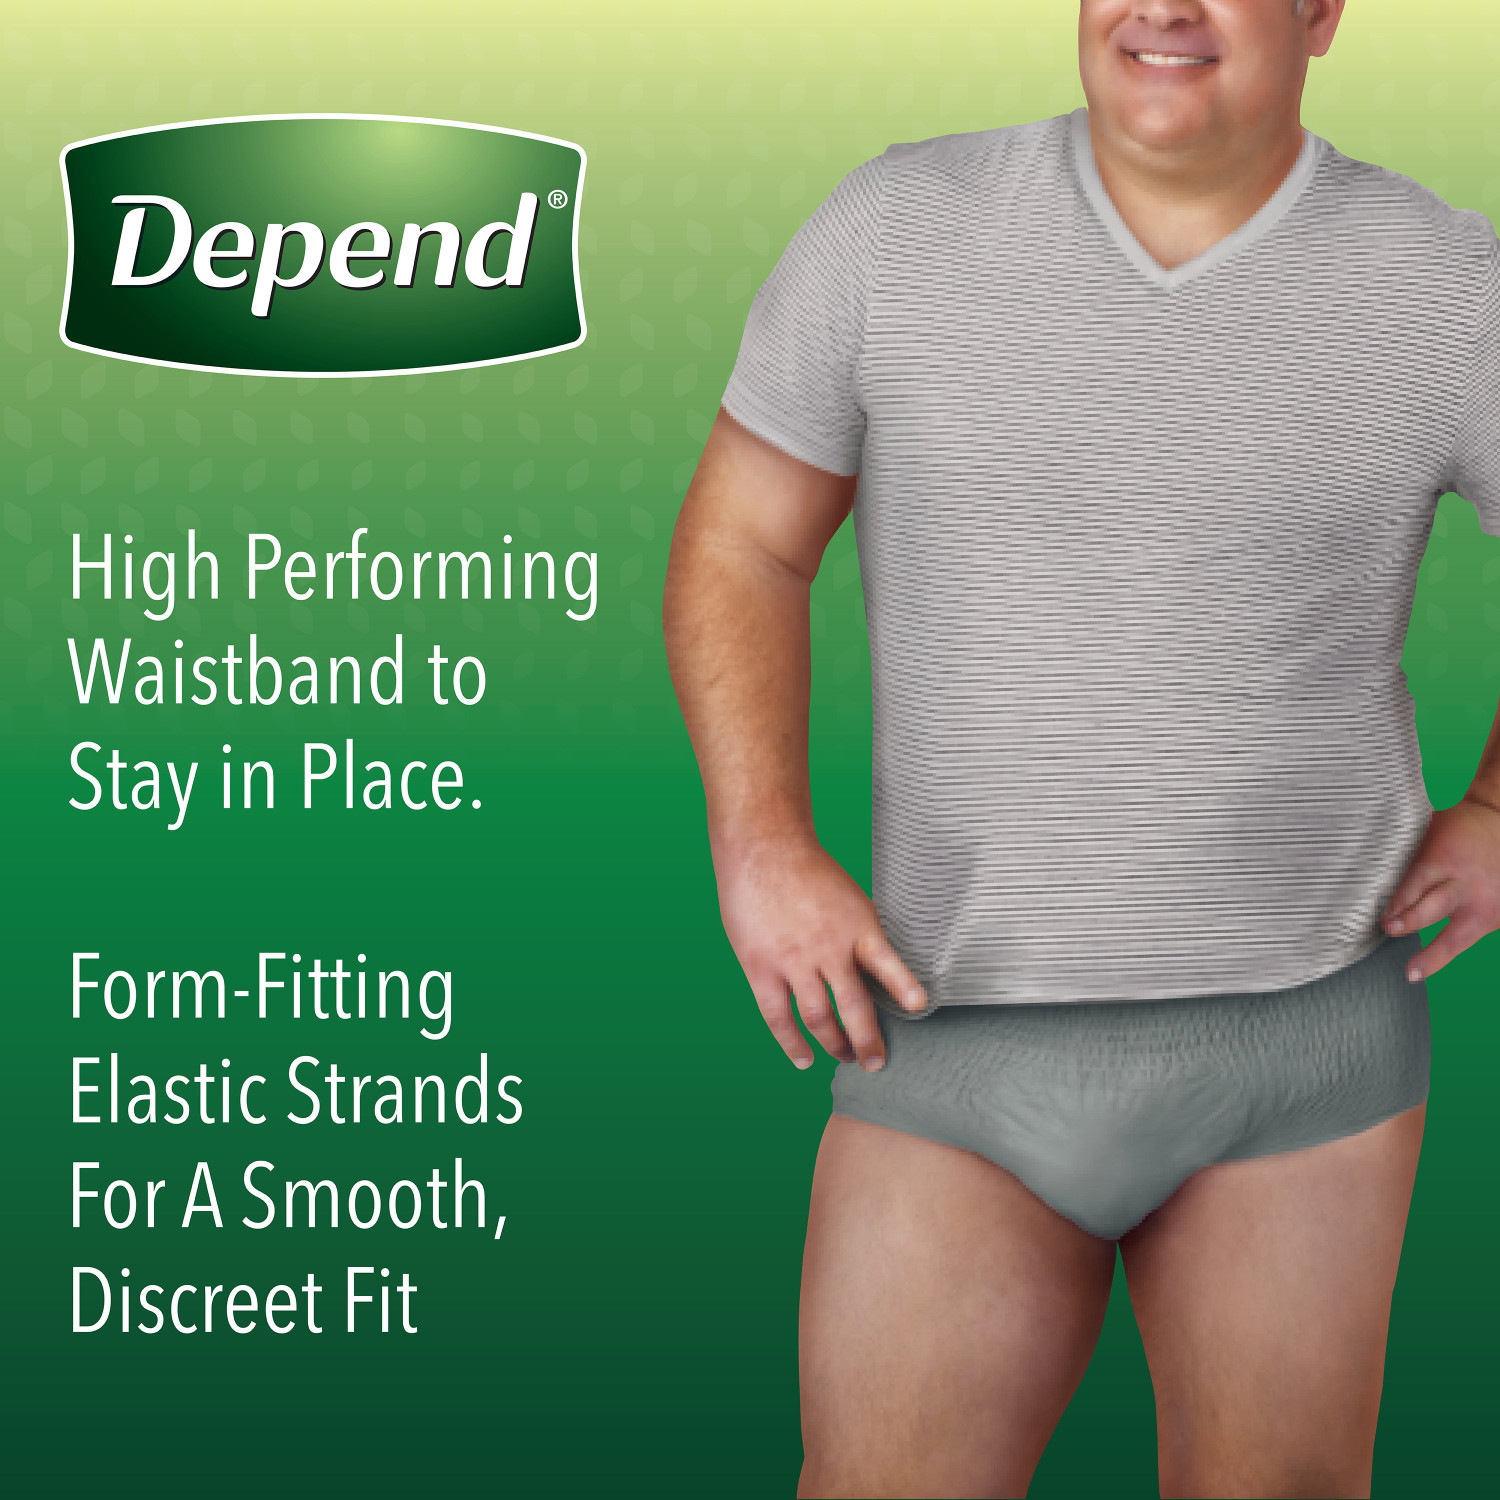 Depend FIT-FLEX Incontinence Underwear For Women, Disposable, Maximum  Absorbency, Small, Blush, 32 Count 